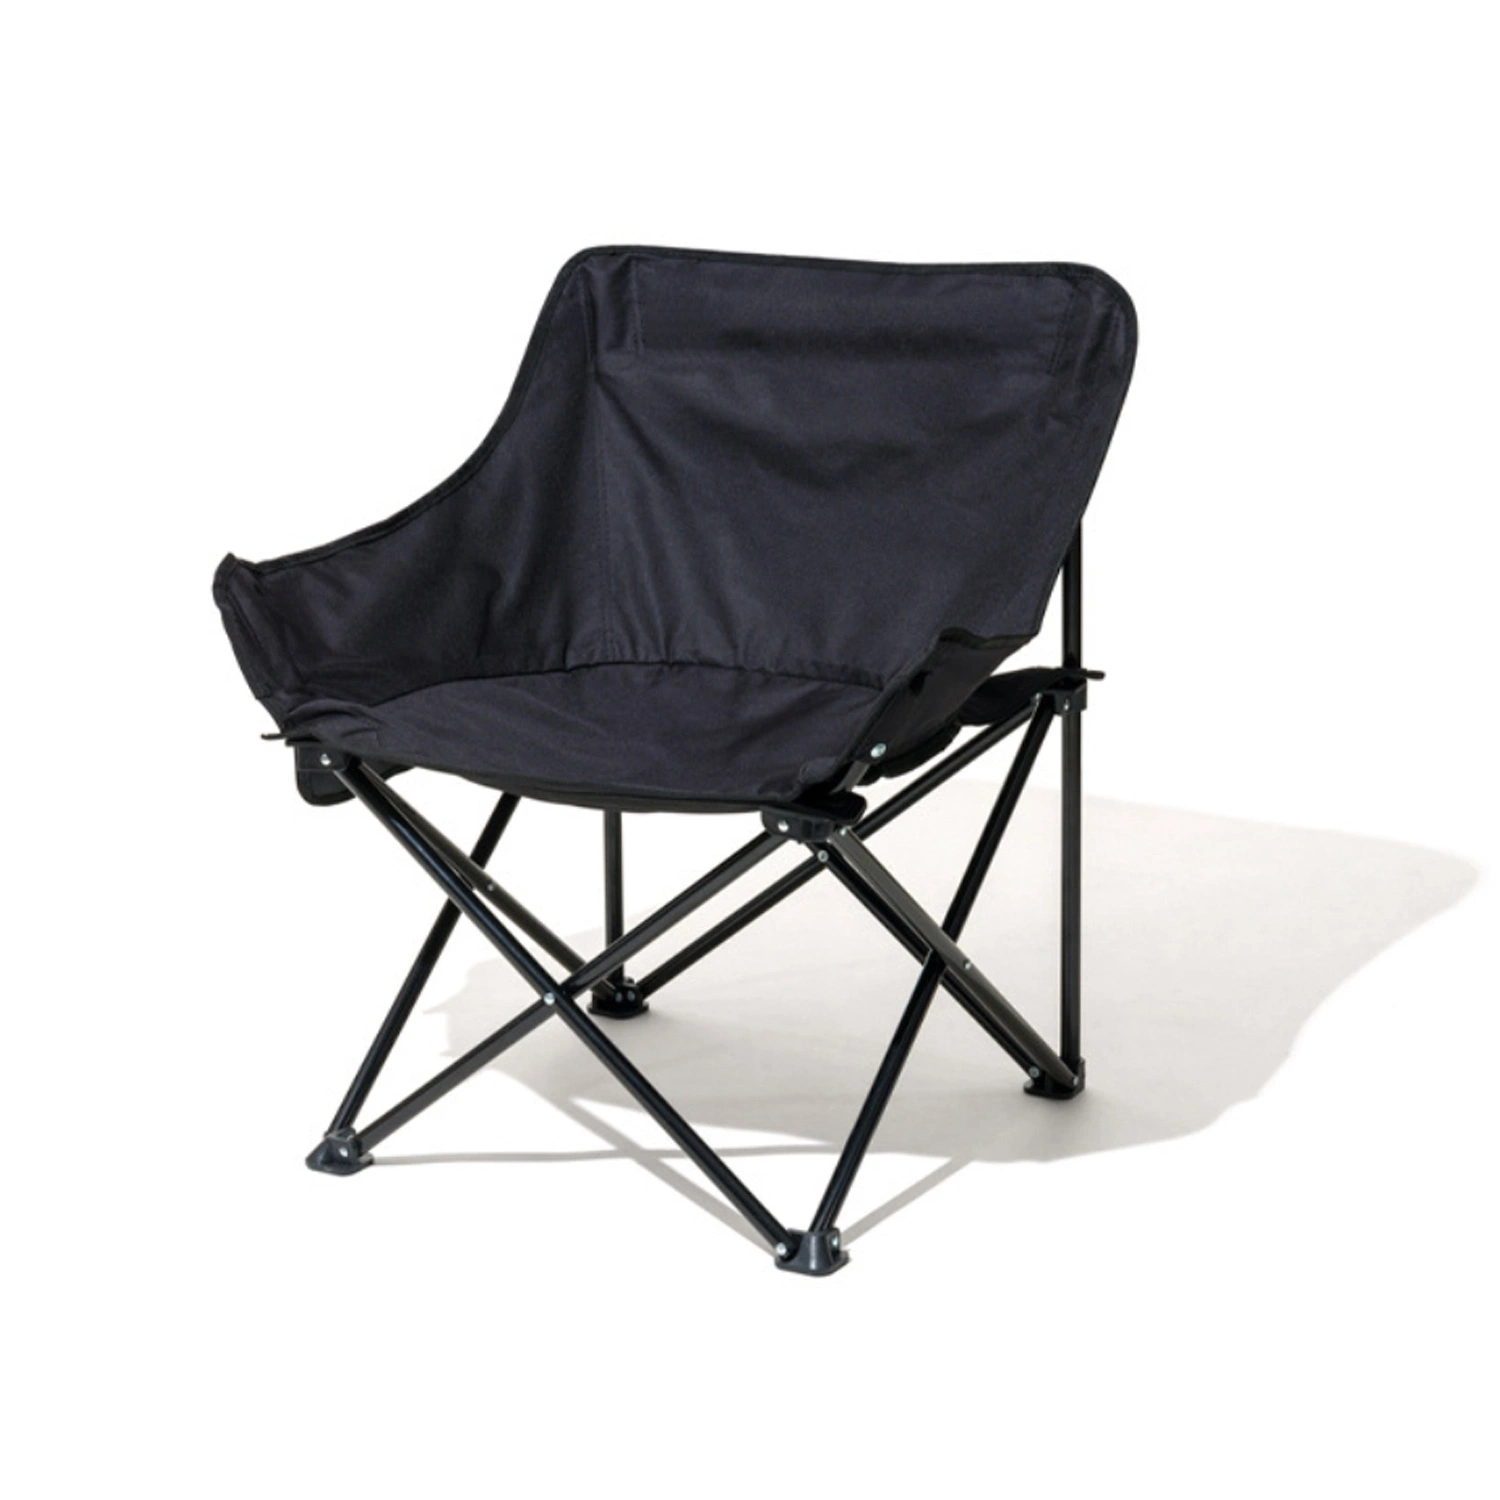 Portable Outdoor Folding Leisure Camping Moon Fishing Chair